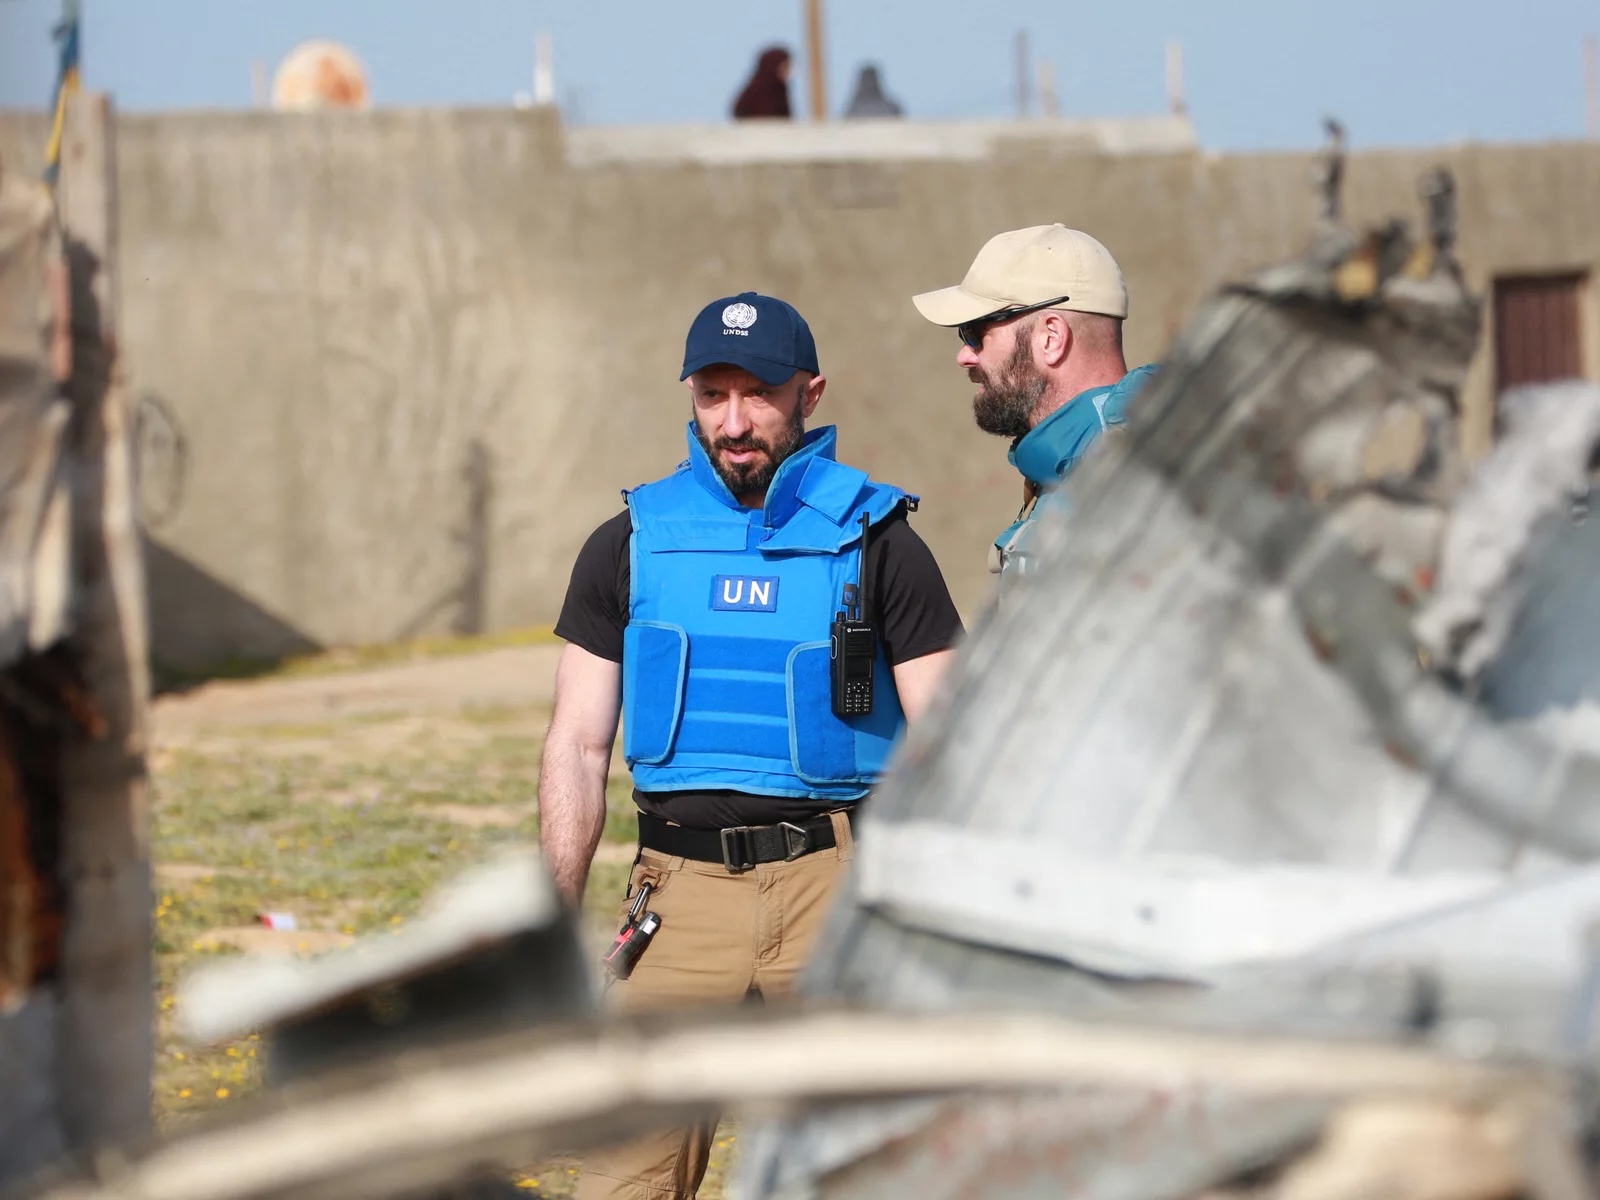 Two men with hats and blue vests speak behind a wreckage.